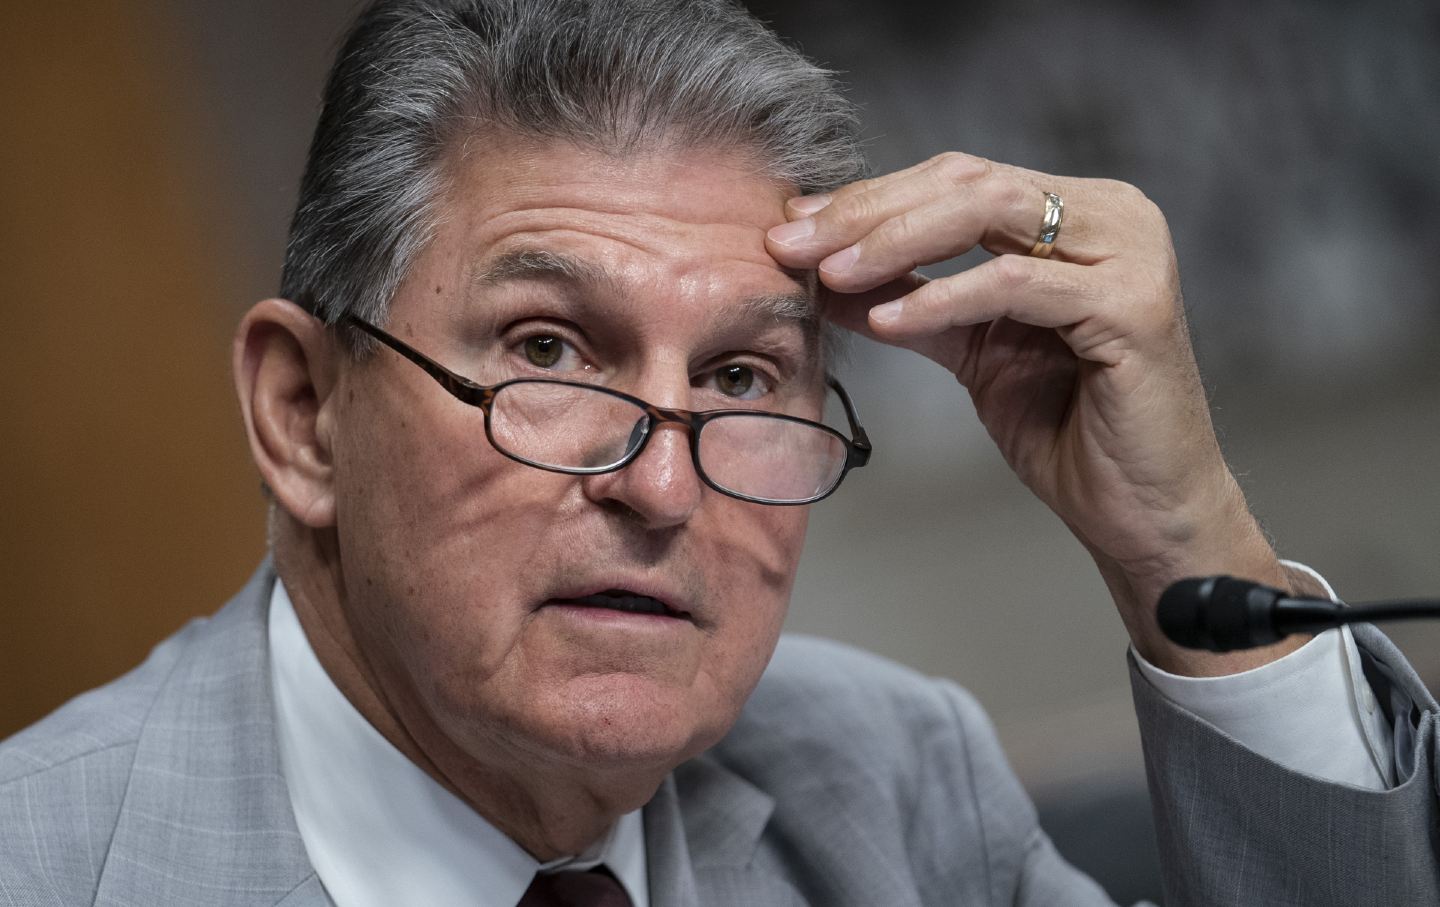 Senator Joe Manchin, a Democrat from West Virginia, speaks during a Senate Armed Services Committee hearing in Washington, D.C., on Tuesday, May 10, 2022. Russia’s occupation of Ukraine threatens to weaken Moscow’s power but leave it more determined to confront the US and allies and to wield nuclear threats, a top US spy said.